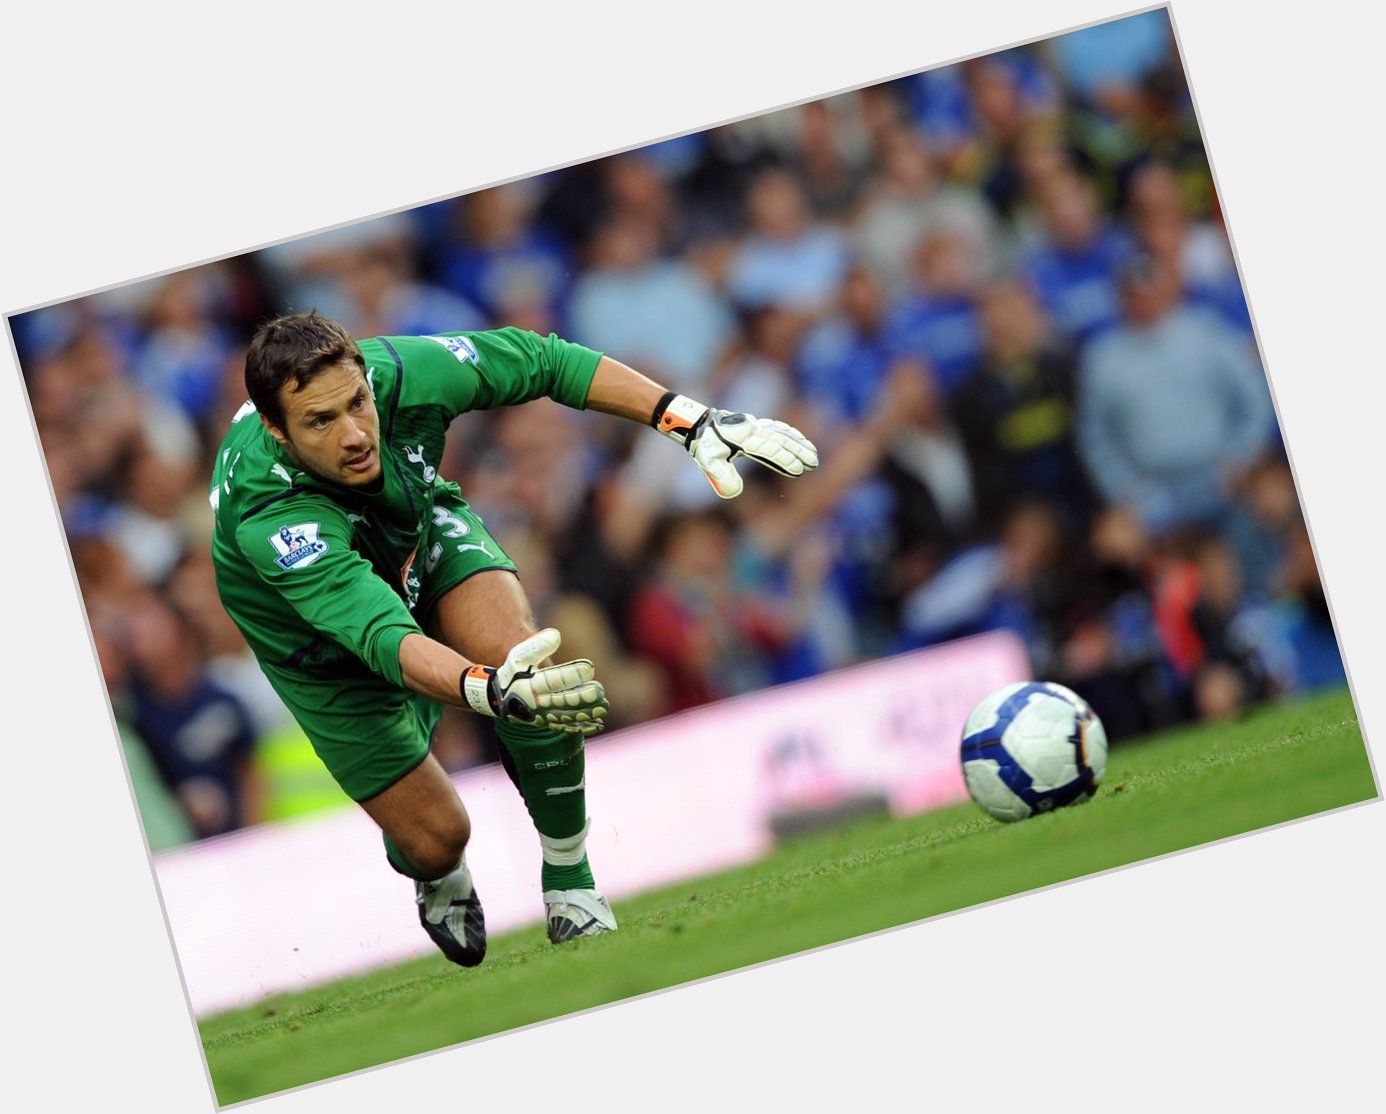 Happy birthday to ex-spurs lads Stephen Kelly and Carlo Cudicini 